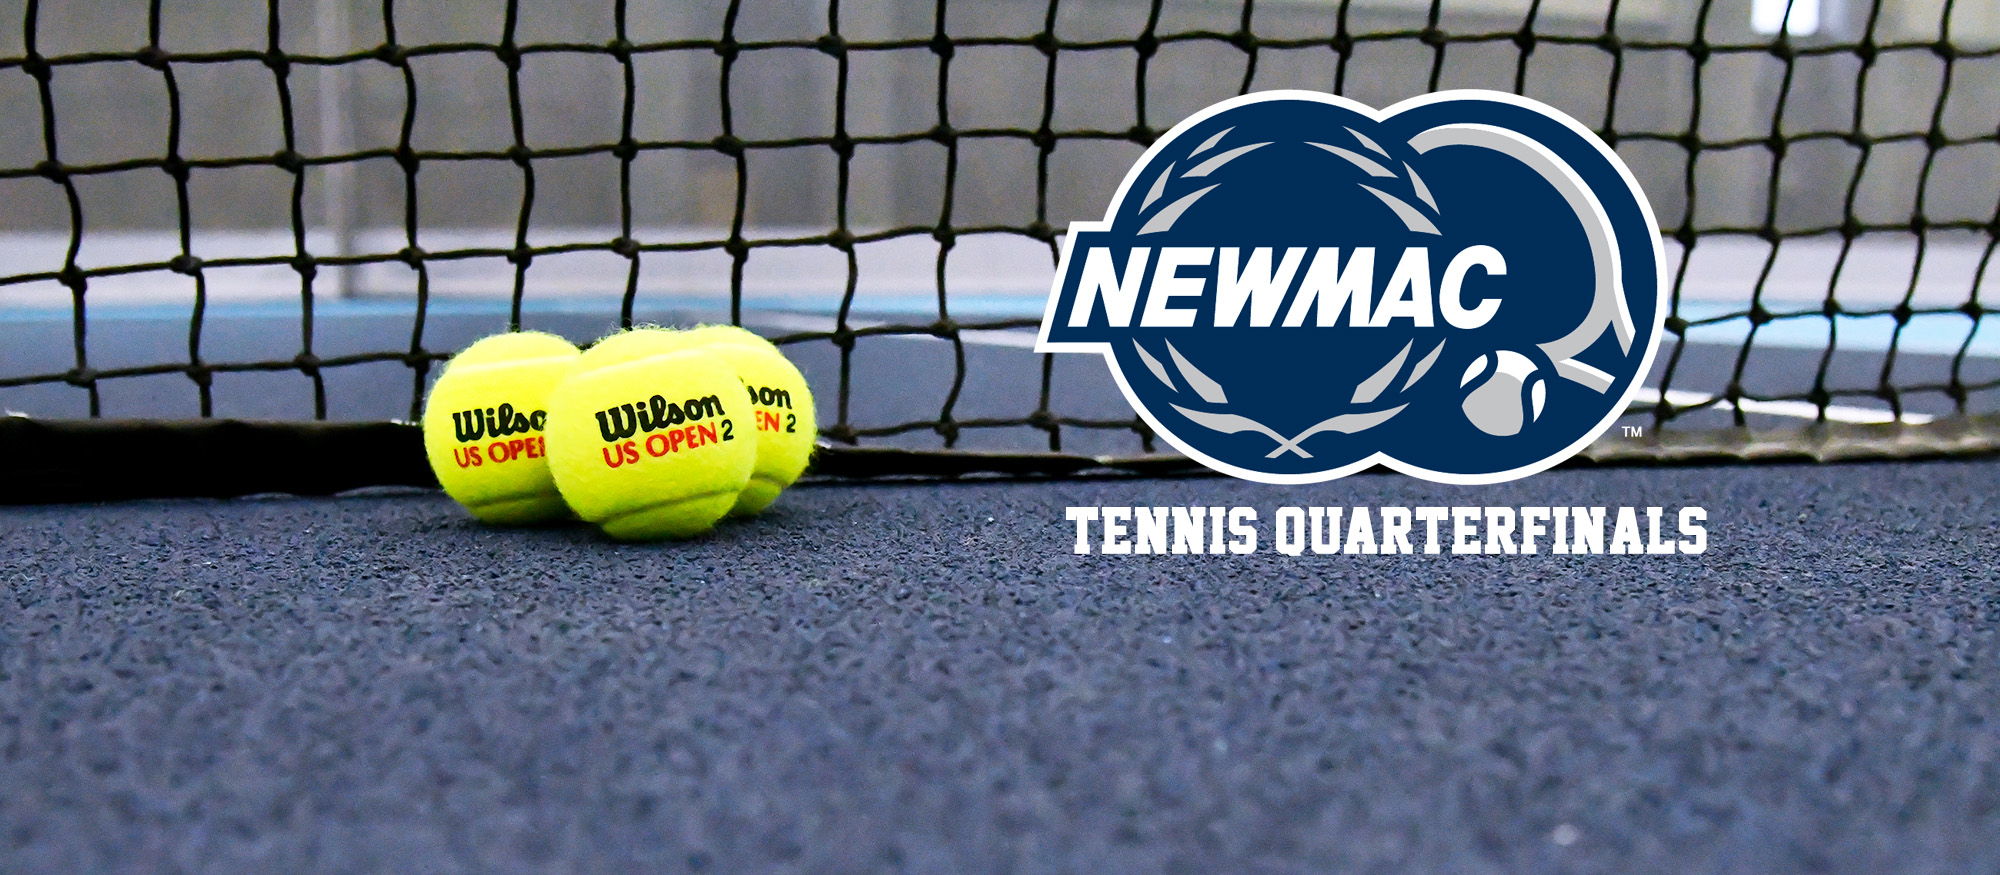 Graphic of a tennis court with a net and three balls. Also features the NEWMAC tennis logo.